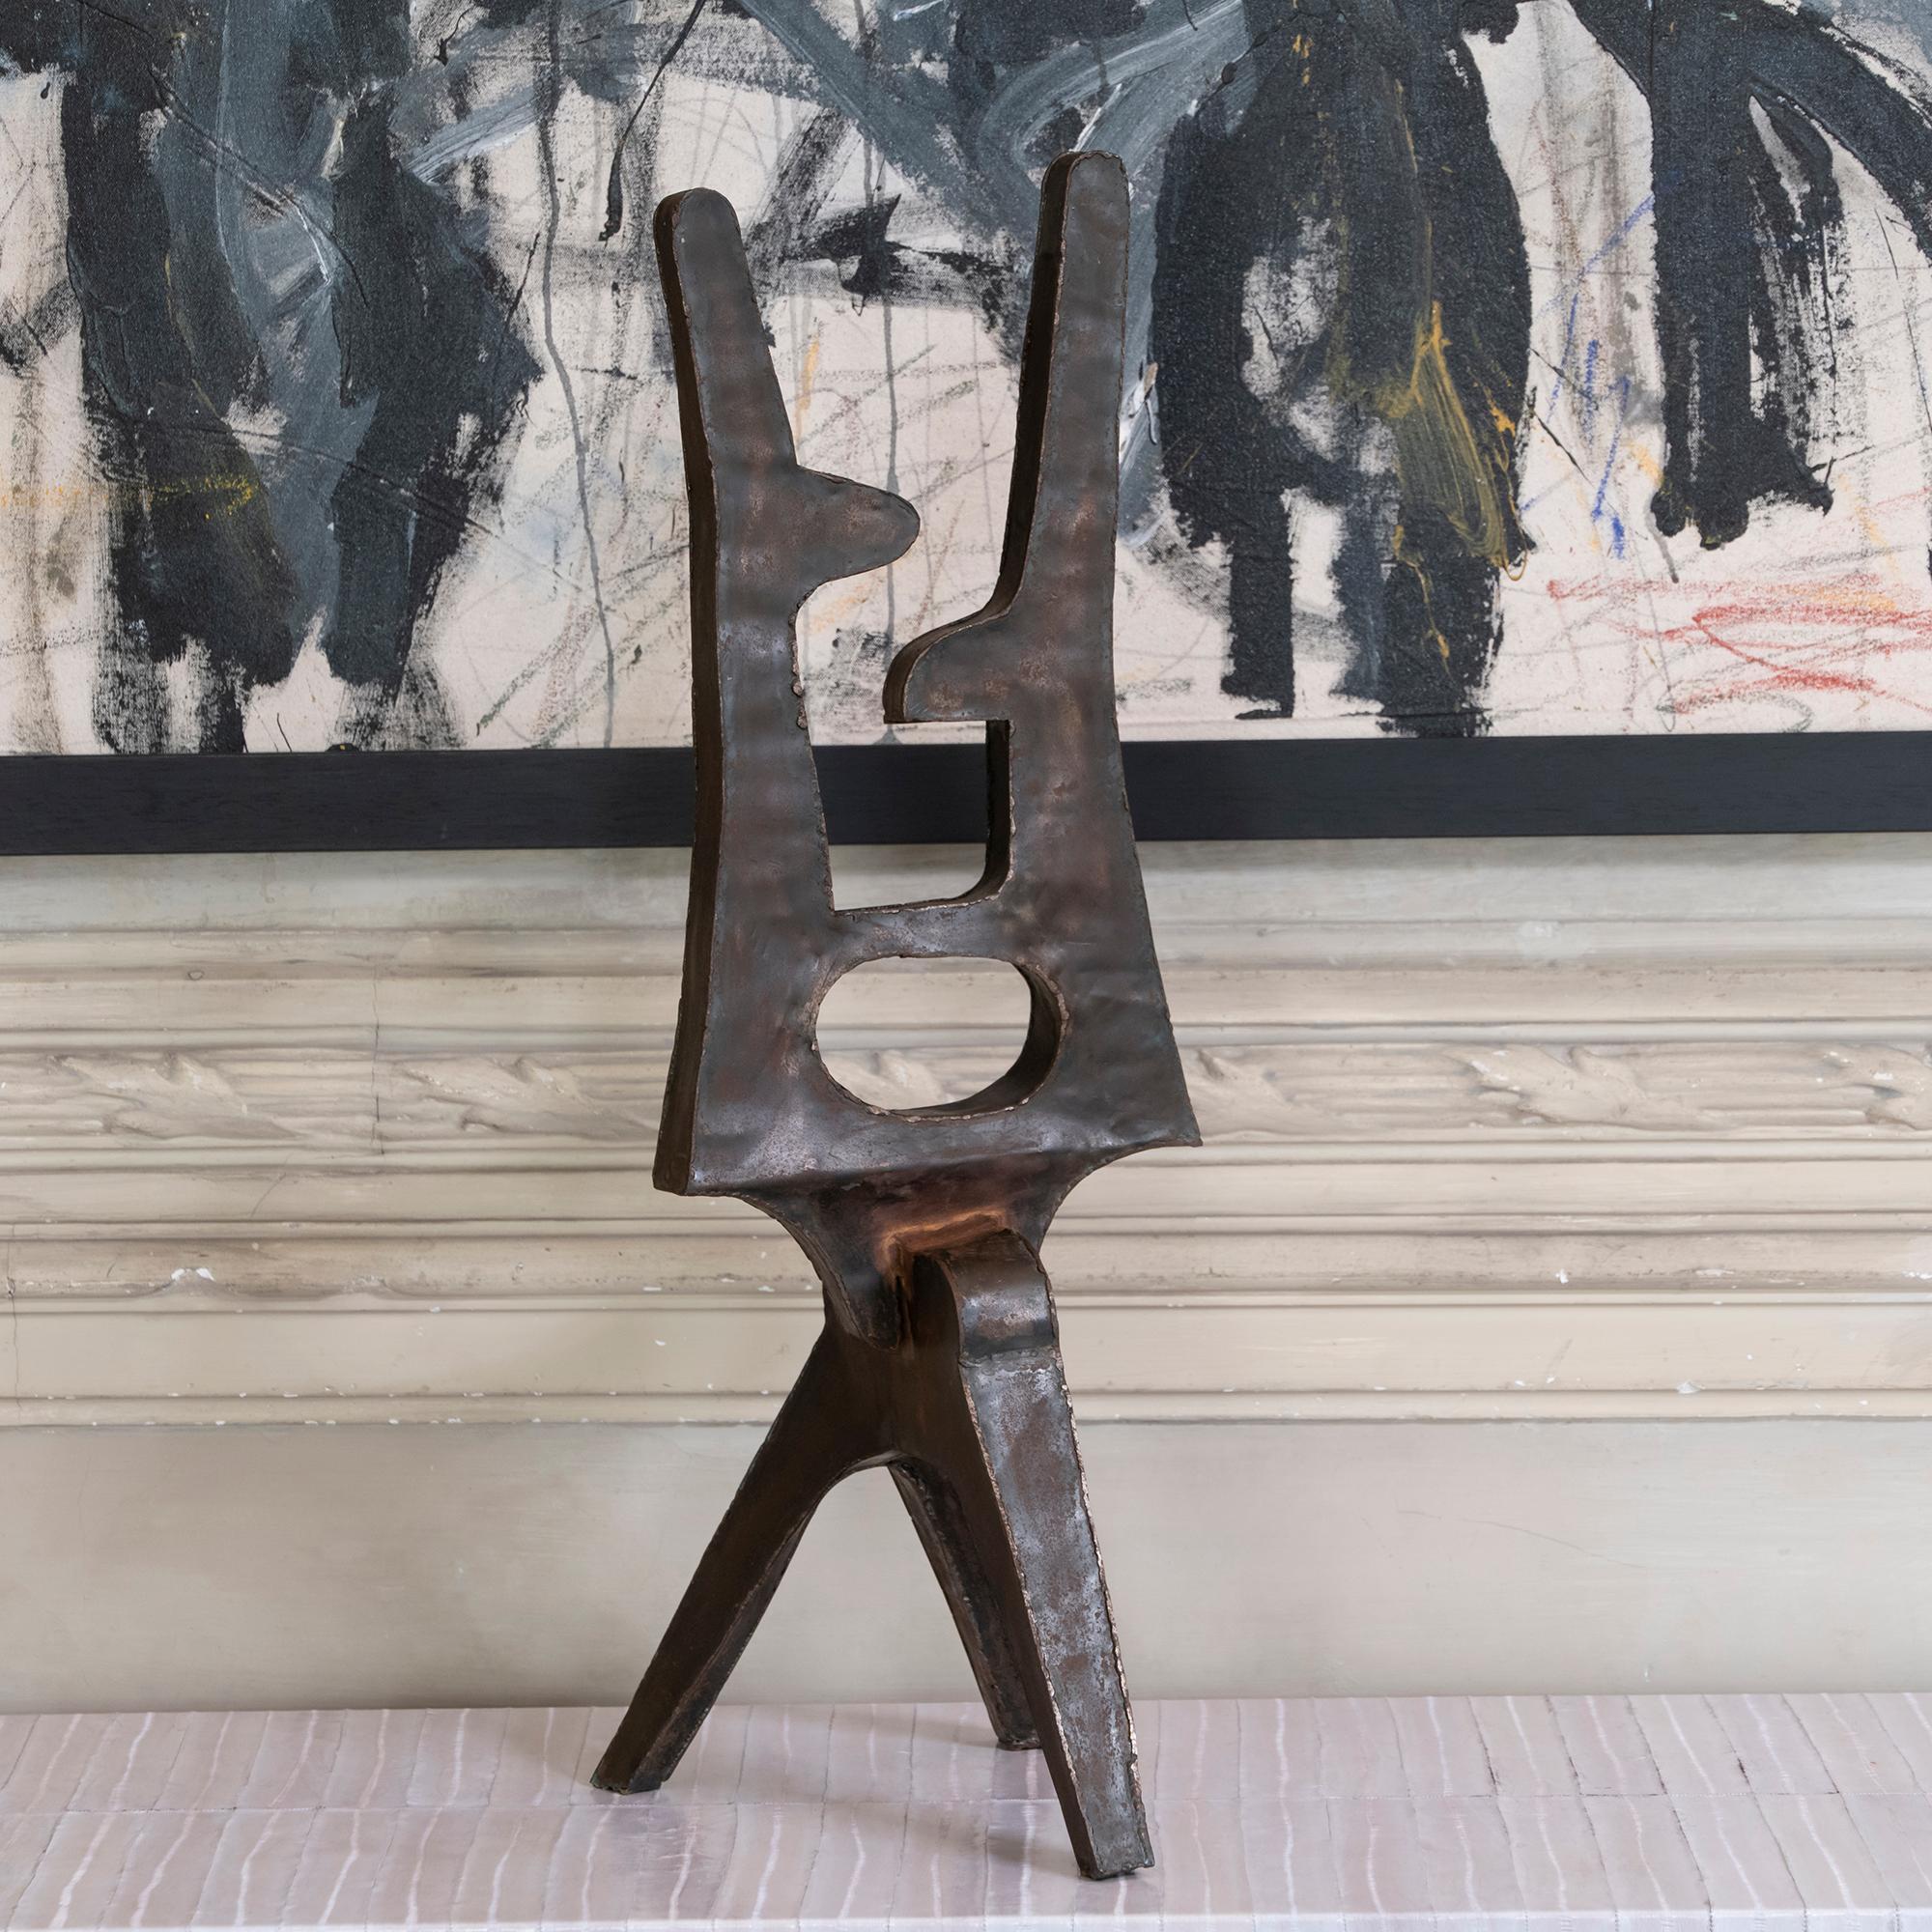 1970s French Brutalist style abstract sculptures, perfect vintage condition and rusted patina, unknown artist, sold as a pair.

Measure tall sculpture cm 26 x 33 x  H 76
Measure medium sculpture cm 24 x 32 x  H66.
 